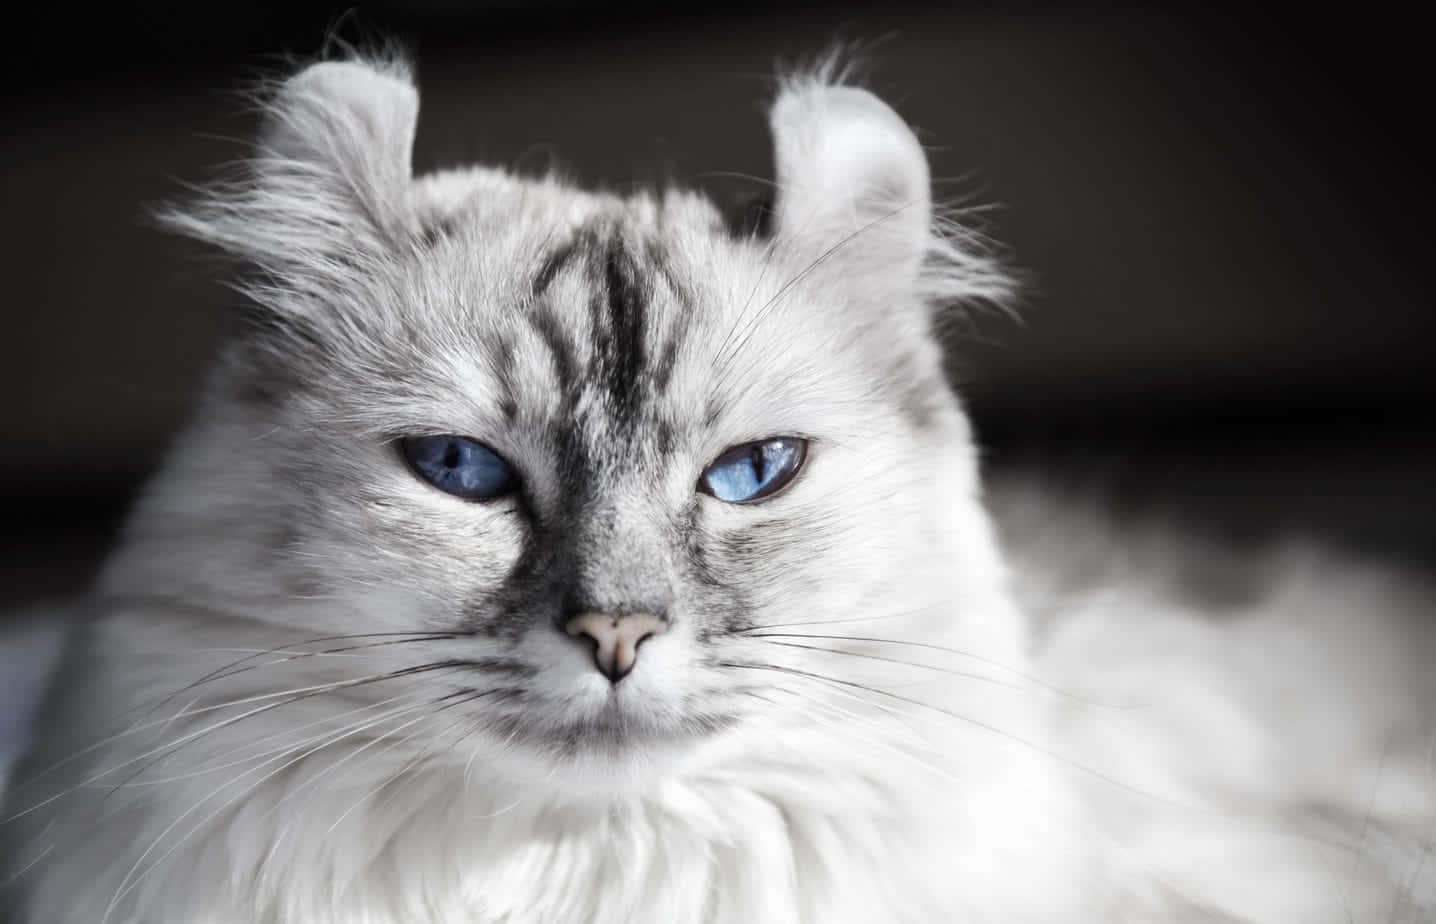 Caption: Beautiful American Curl cat with striking blue eyes Wallpaper